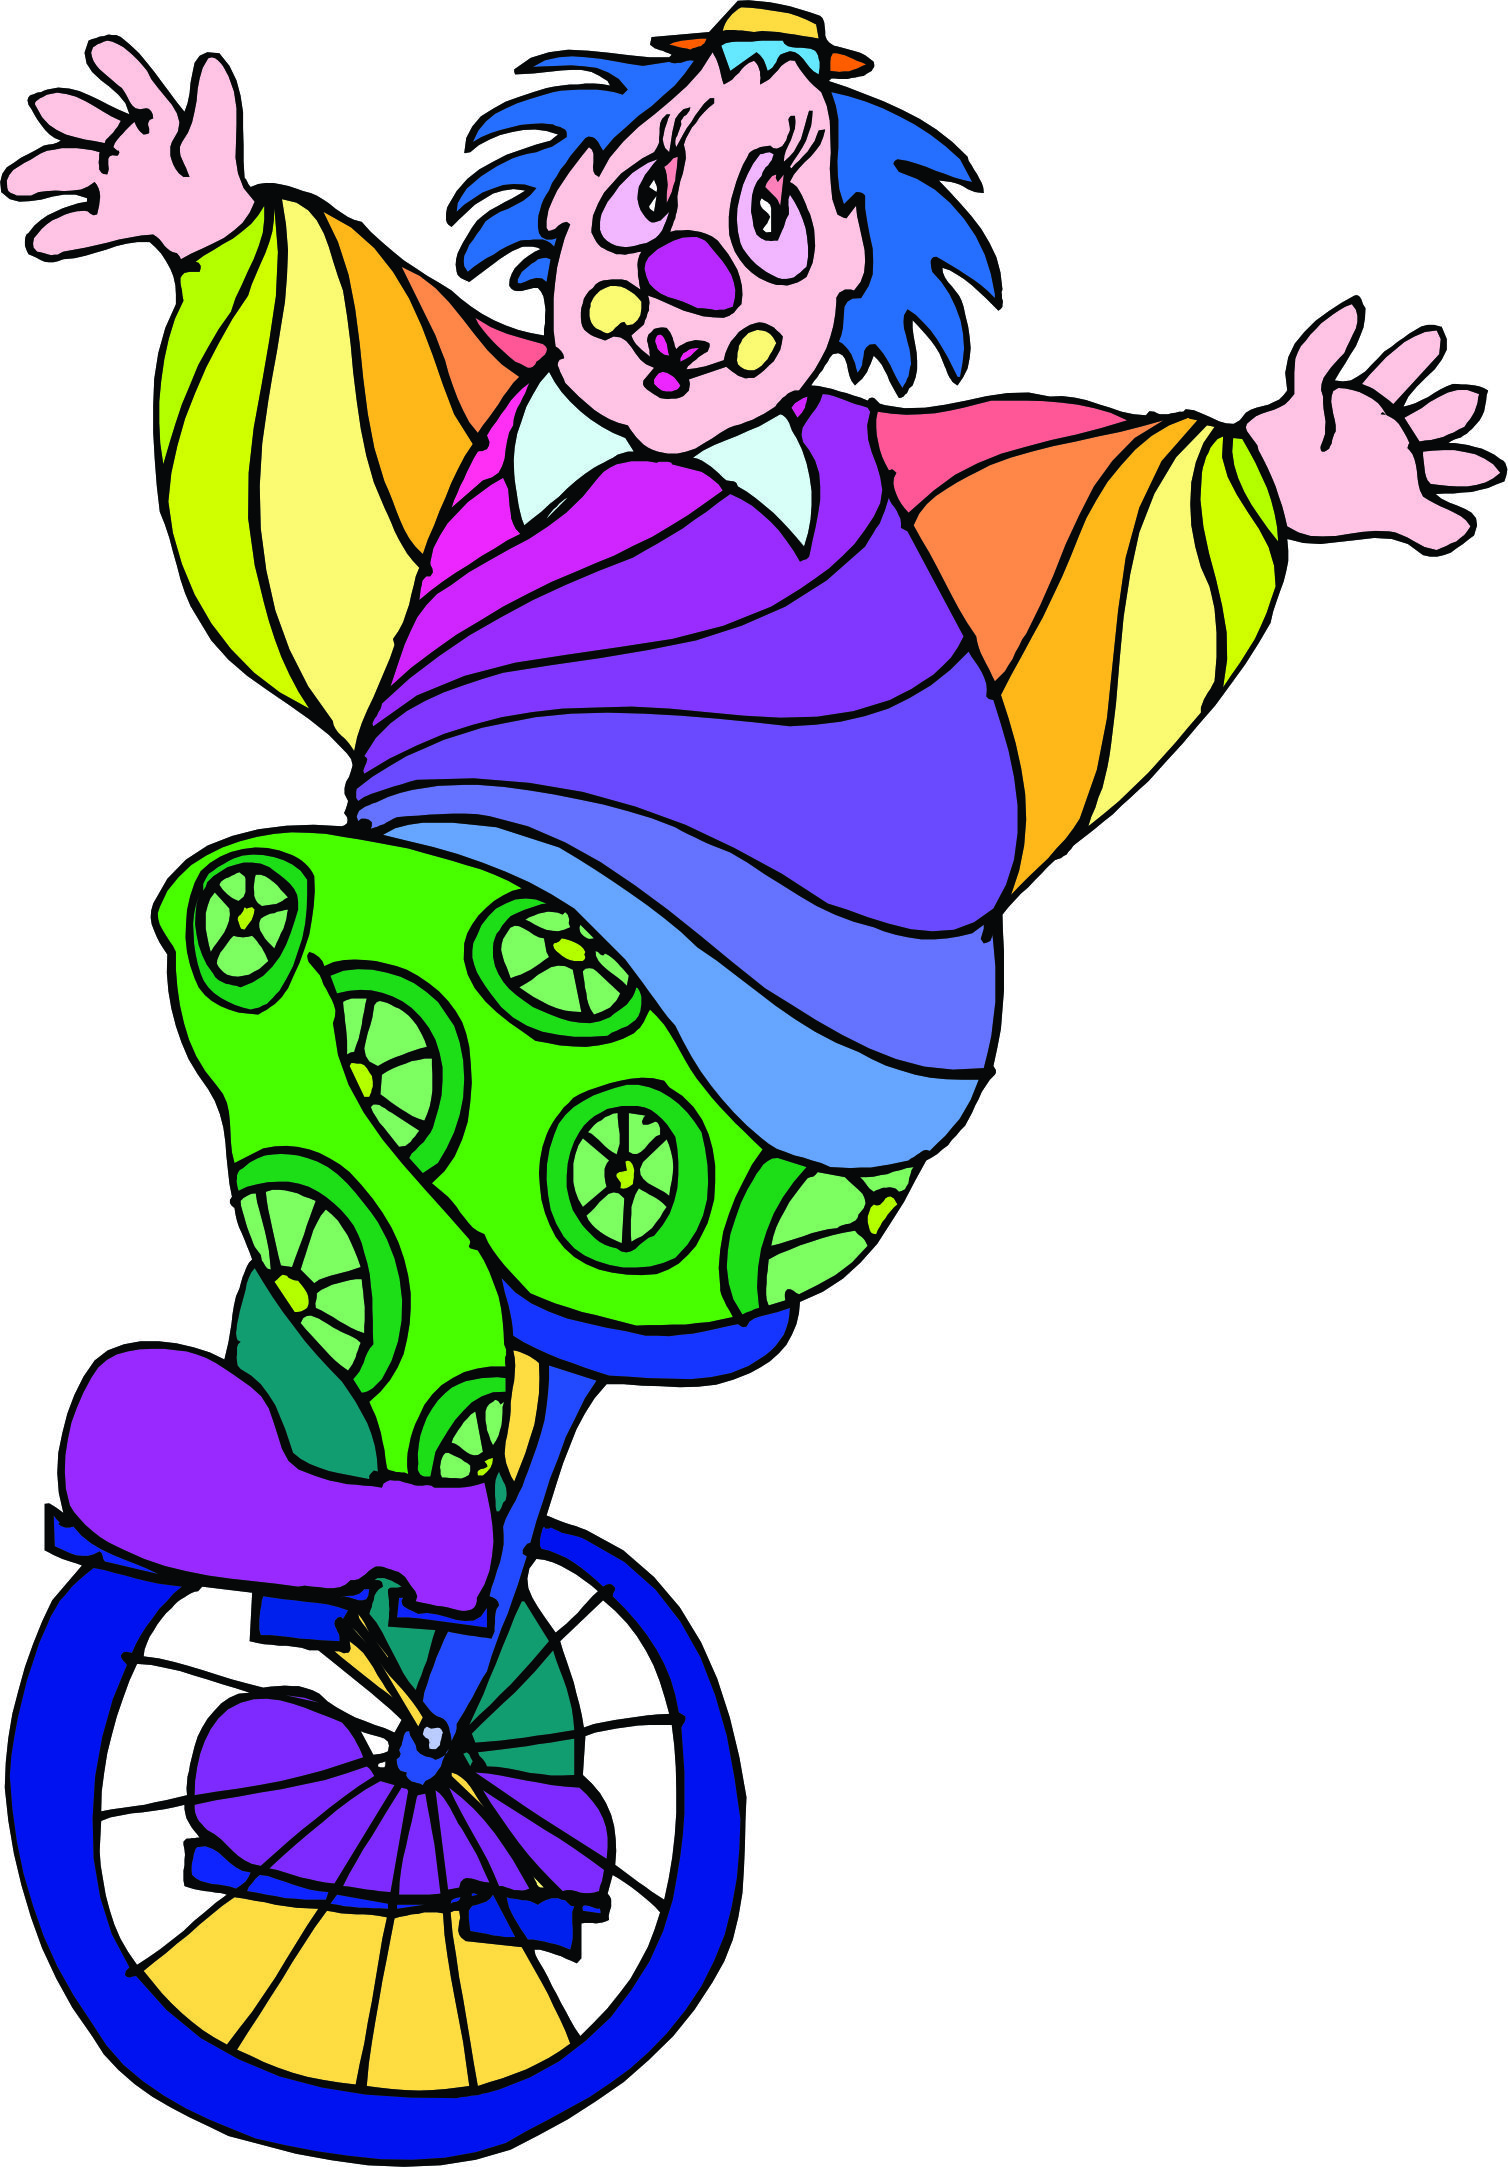 Cartoon Clowns | Page 2 - Clipart library - Clipart library